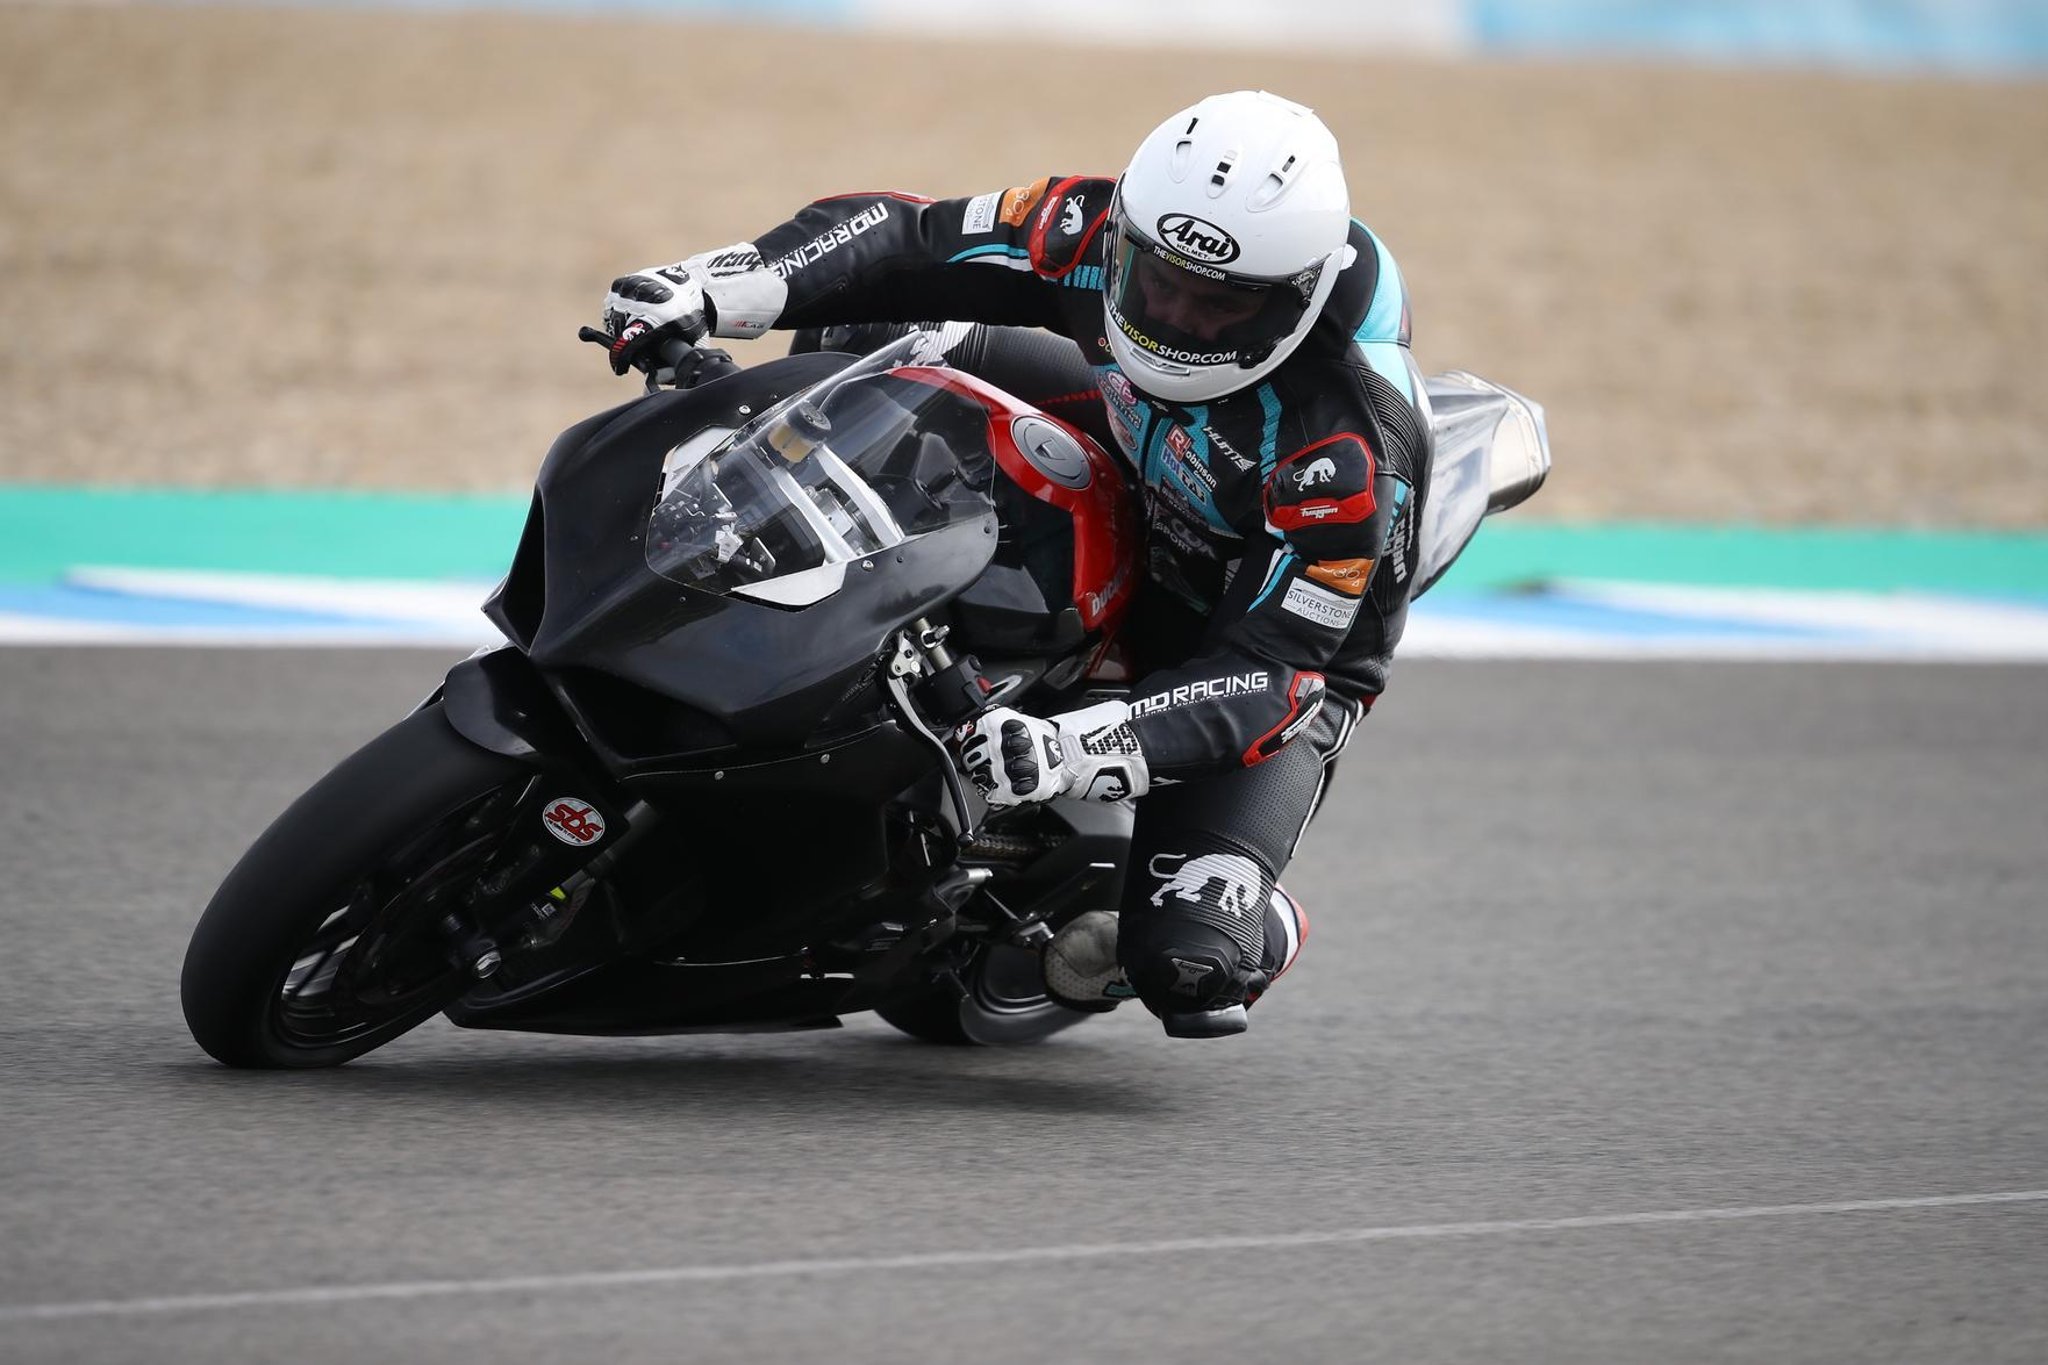 Michael Dunlop breaks cover on PBM Ducati in two-day test at Bishopscourt Racing Circuit